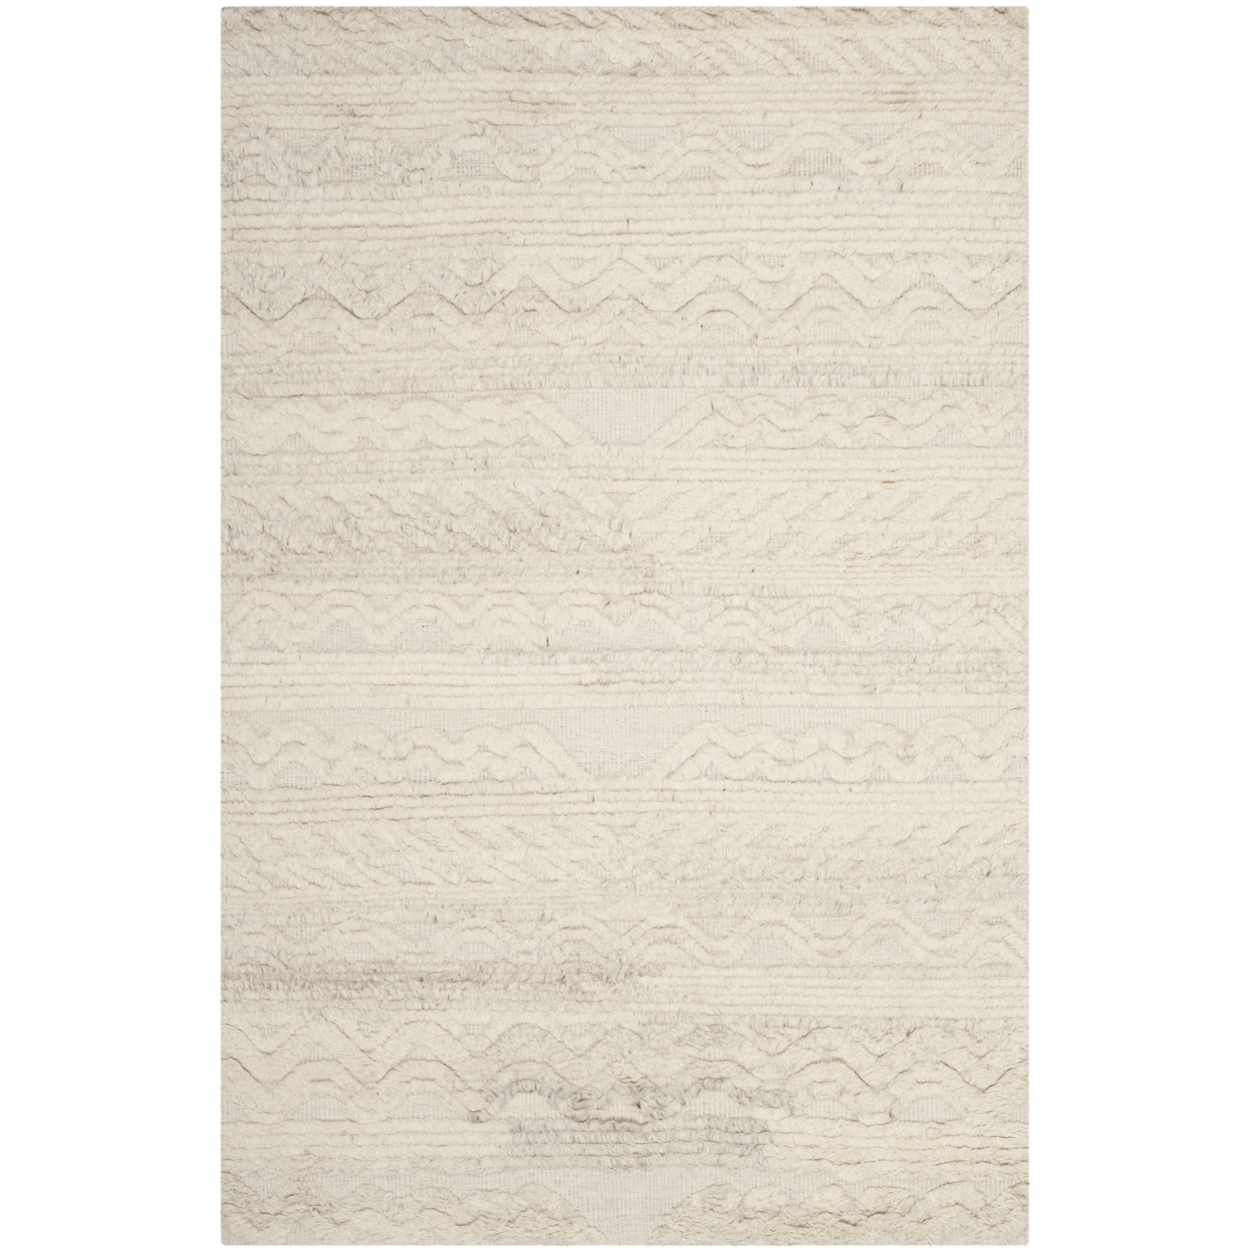 SAFAVIEH Kenya Collection KNY816A Hand-knotted Ivory Rug - 9' X 12'